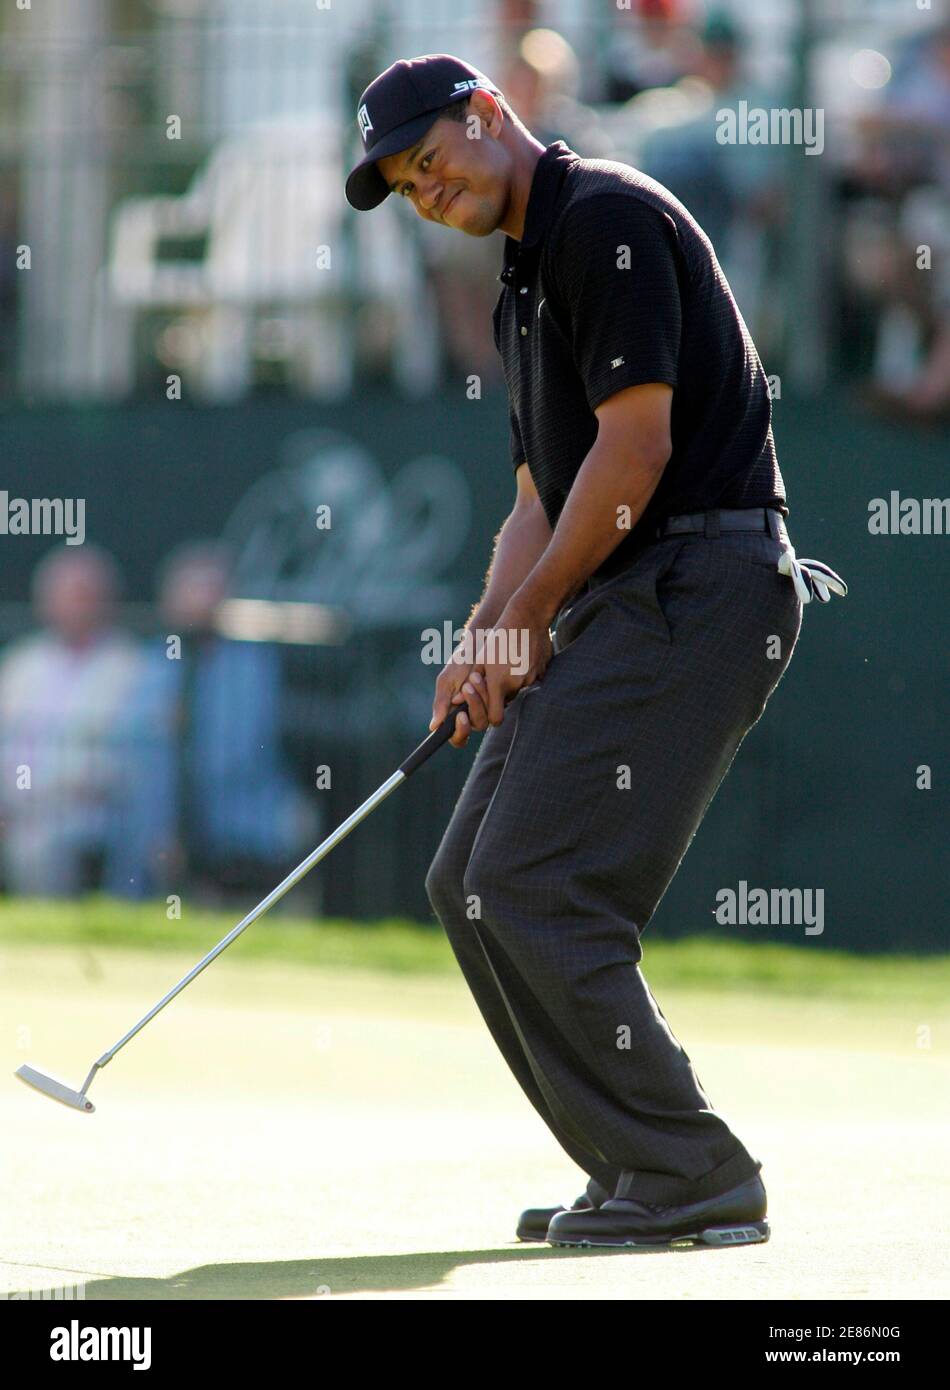 Tiger Woods reacts to a missed putt on the 17th hole during the second round of play at the Arnold Palmer Invitational golf tournament held at the Bay Hill Club in Orlando, Florida March 16, 2007. Woods finished the round at three-under-par with a score of 137. REUTERS/Rick Fowler (UNITED STATES) Stock Photo